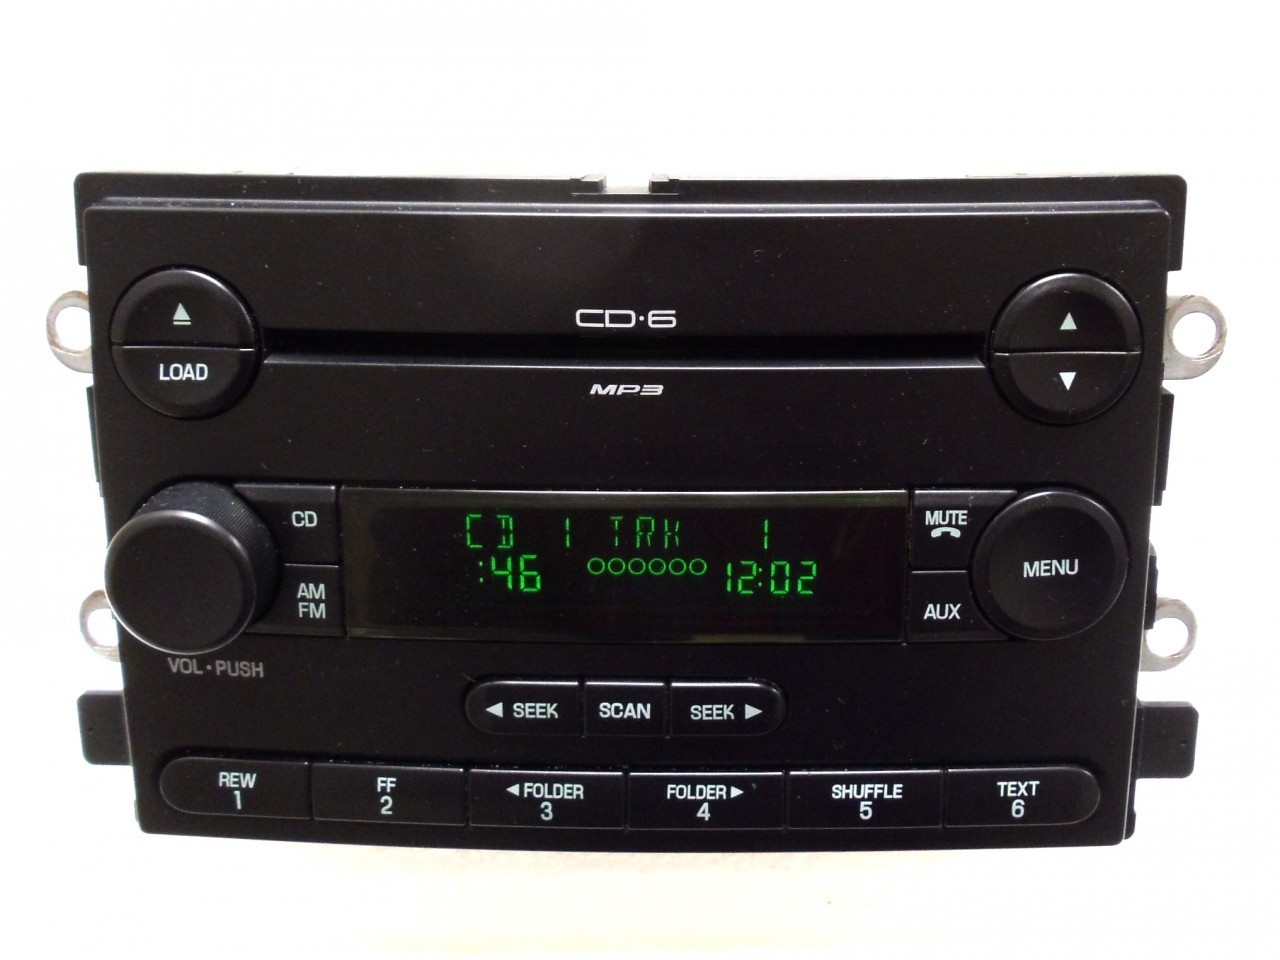 Stock ford mp3 players